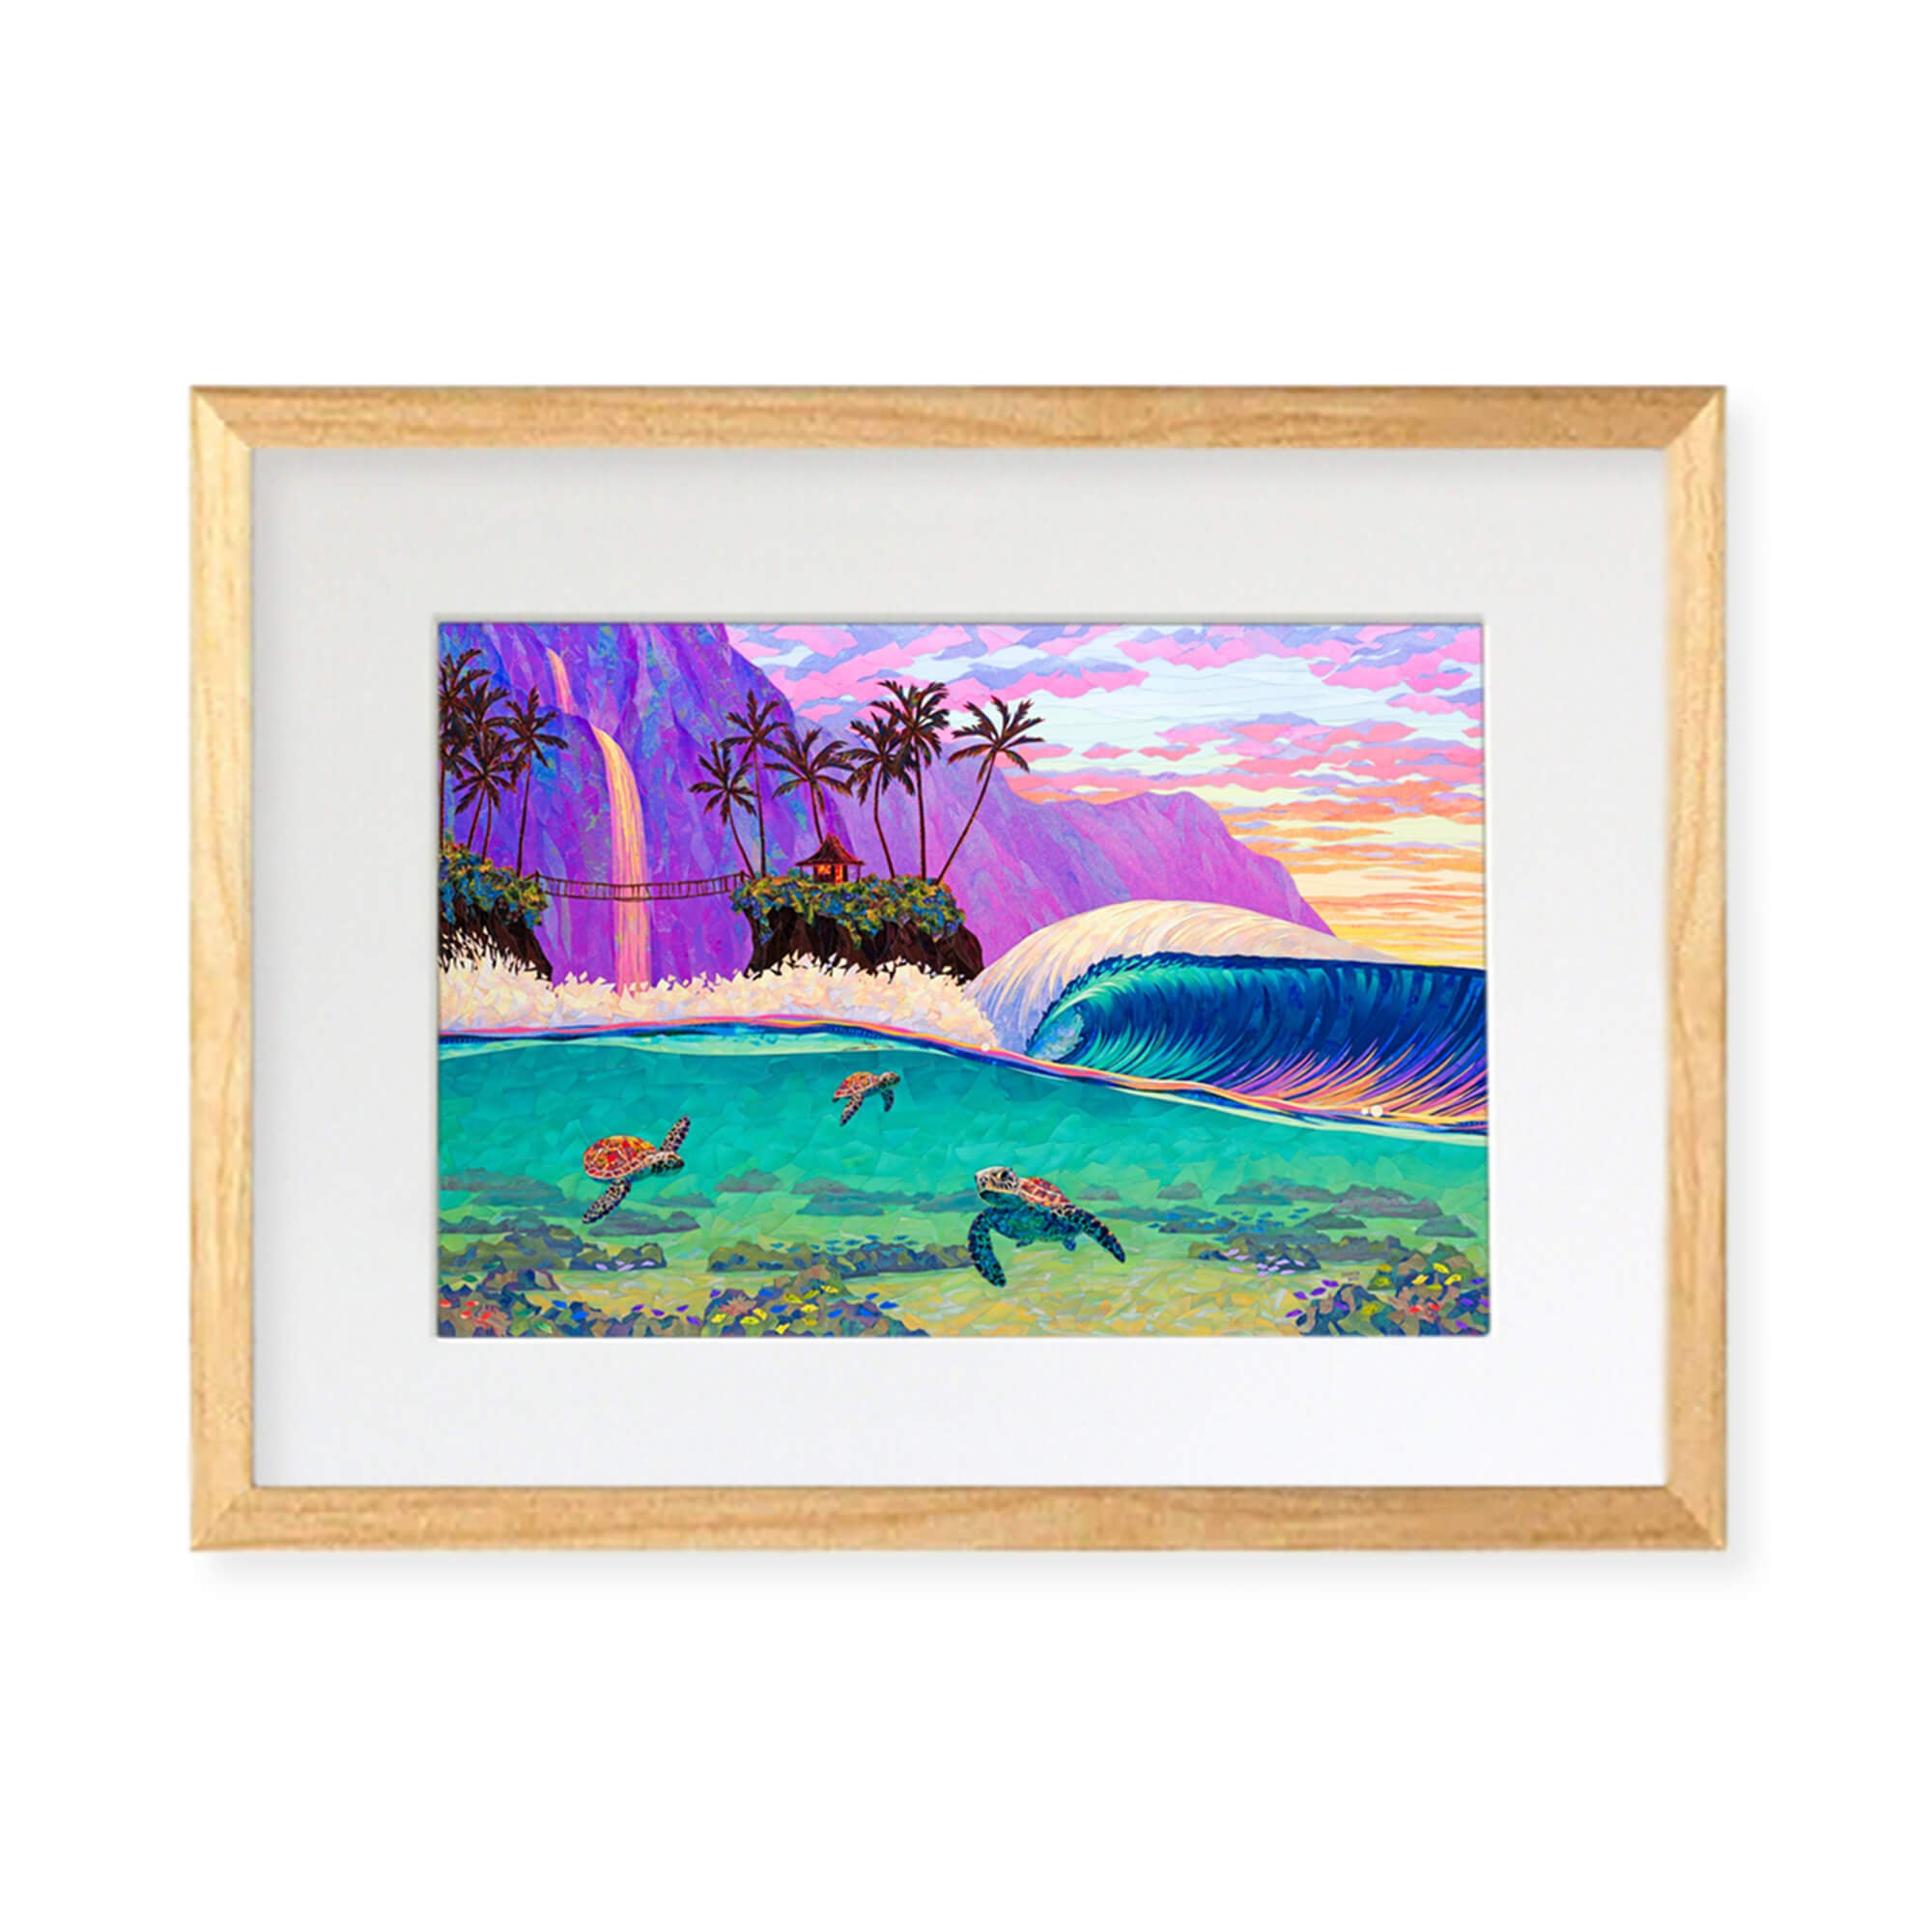 A framed matted art print featuring a collage of a stunning seascape with three sea turtles, a hut on an island, and a colorful mountain with a waterfall background by Hawaii artist Patrick Parker